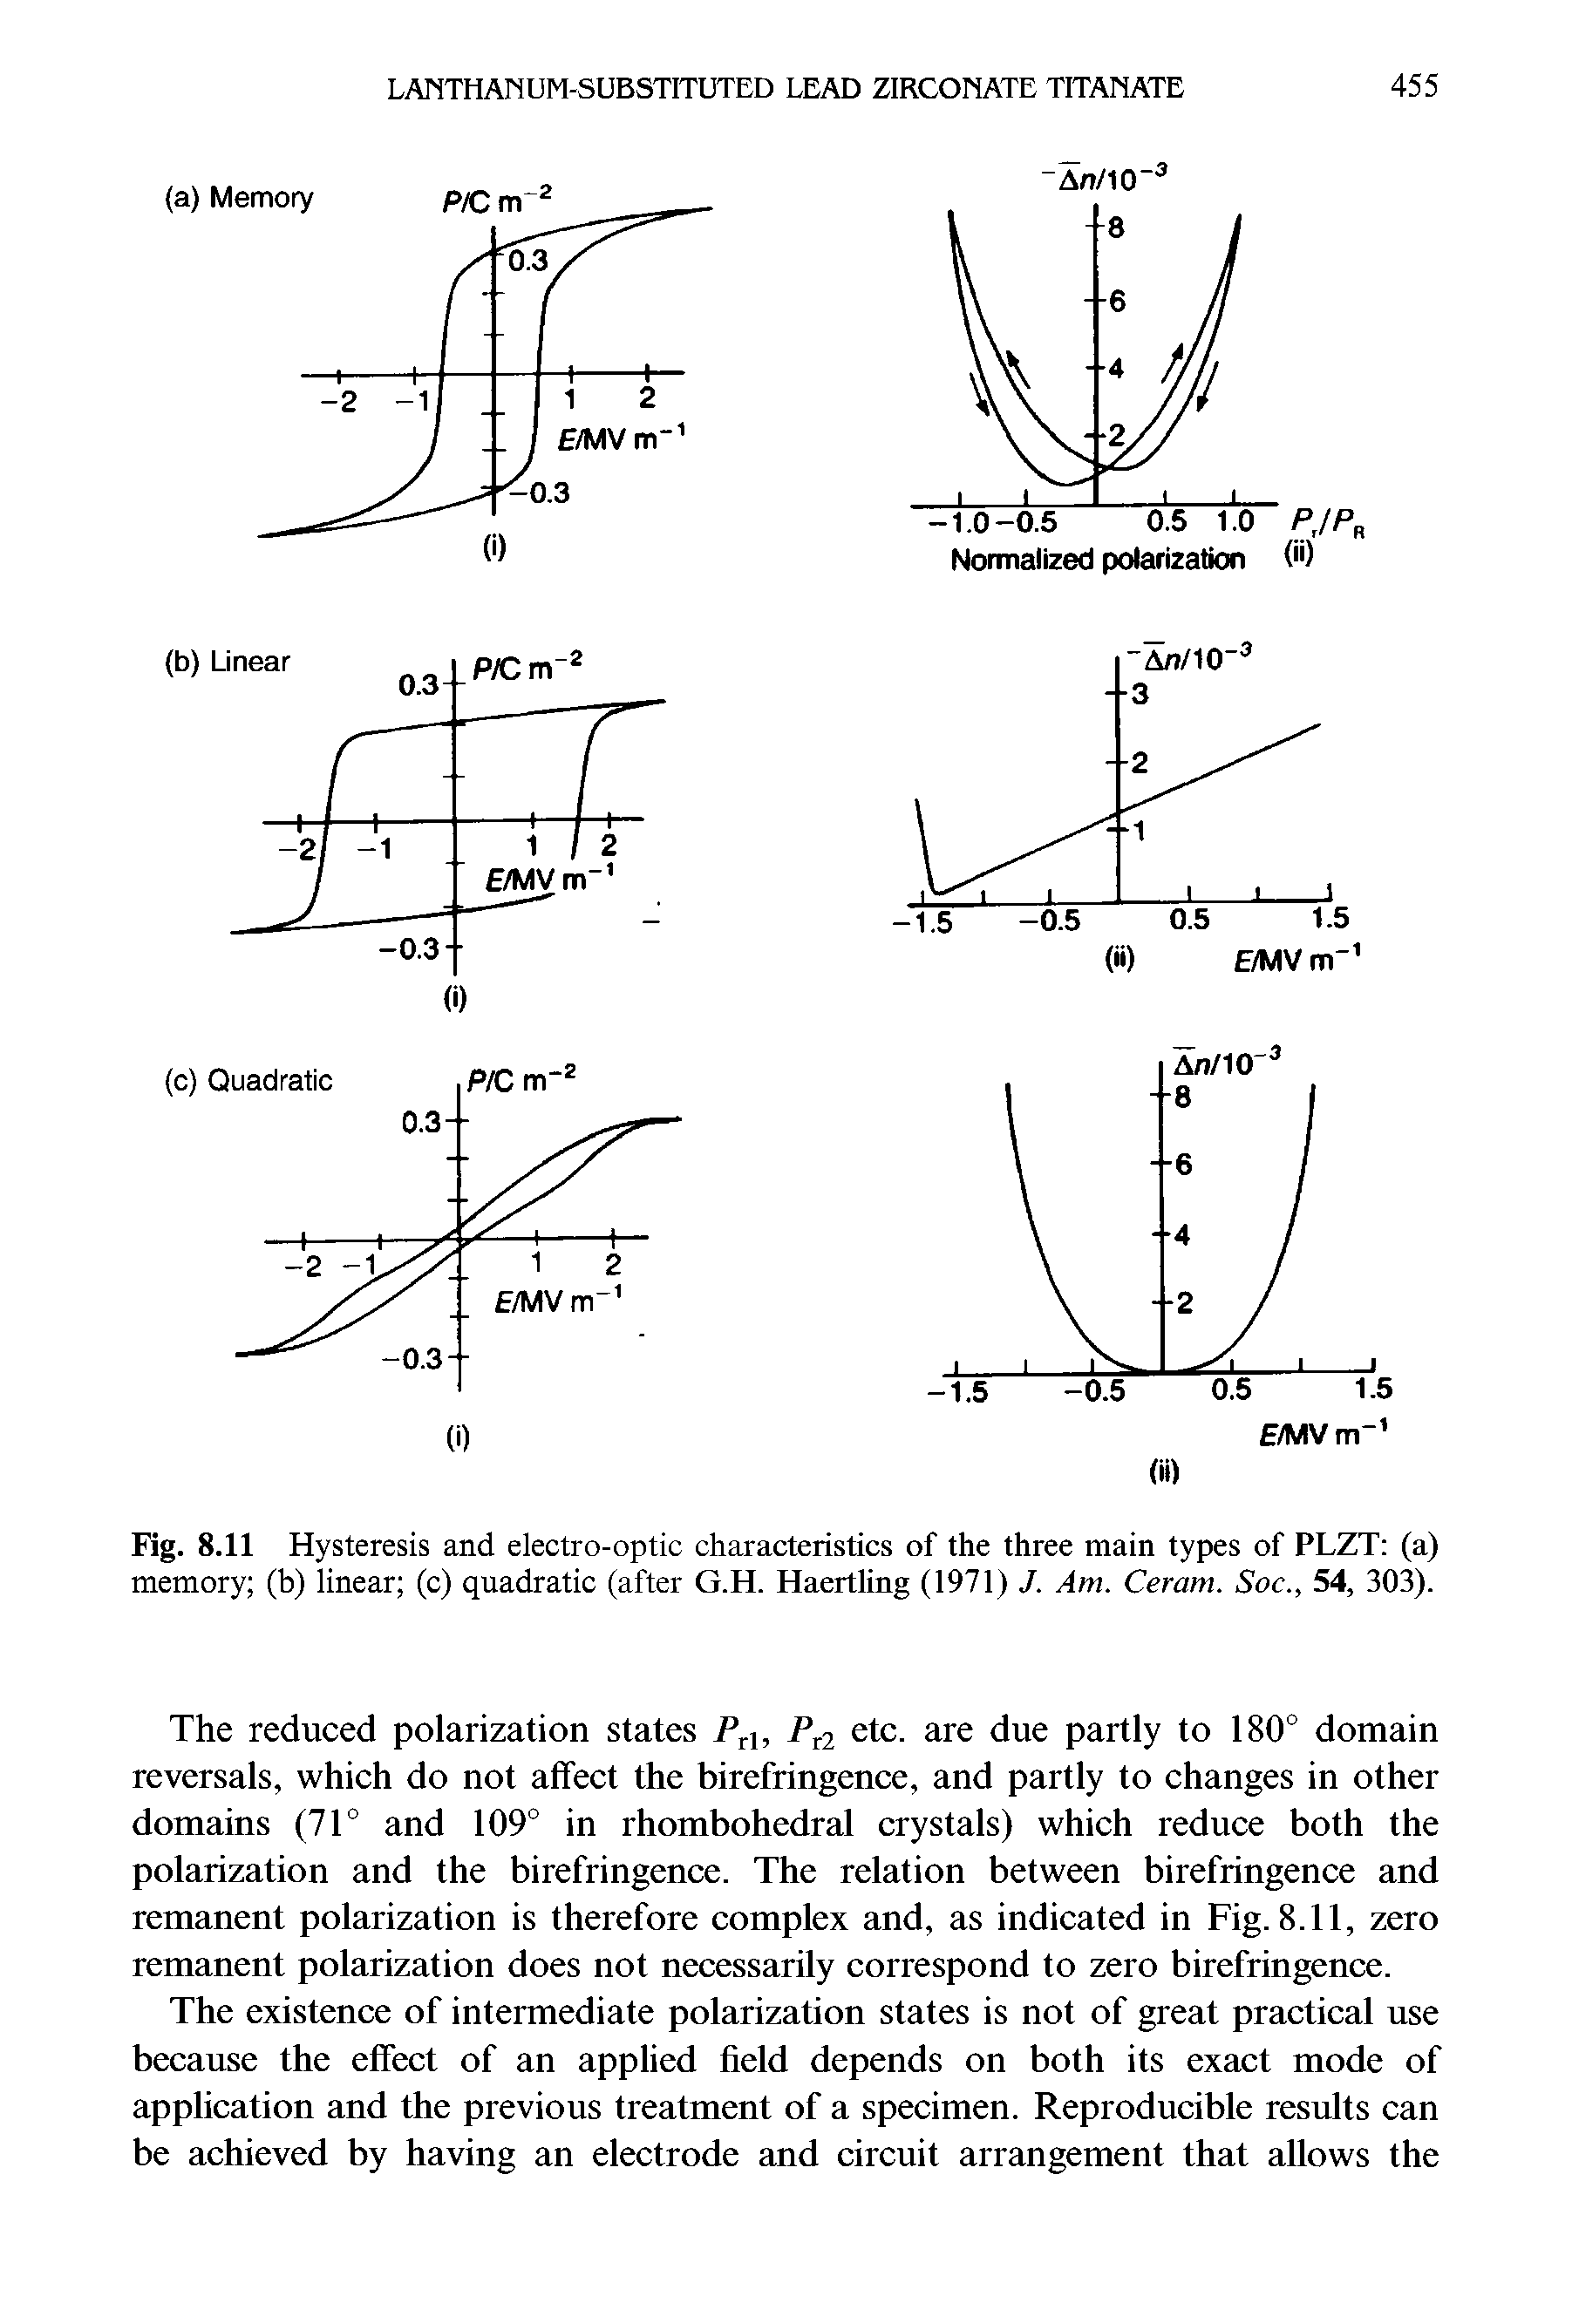 Fig. 8.11 Hysteresis and electro-optic characteristics of the three main types of PLZT (a) memory (b) linear (c) quadratic (after G.H. Haertling (1971) J. Am. Ceram. Soc., 54, 303).